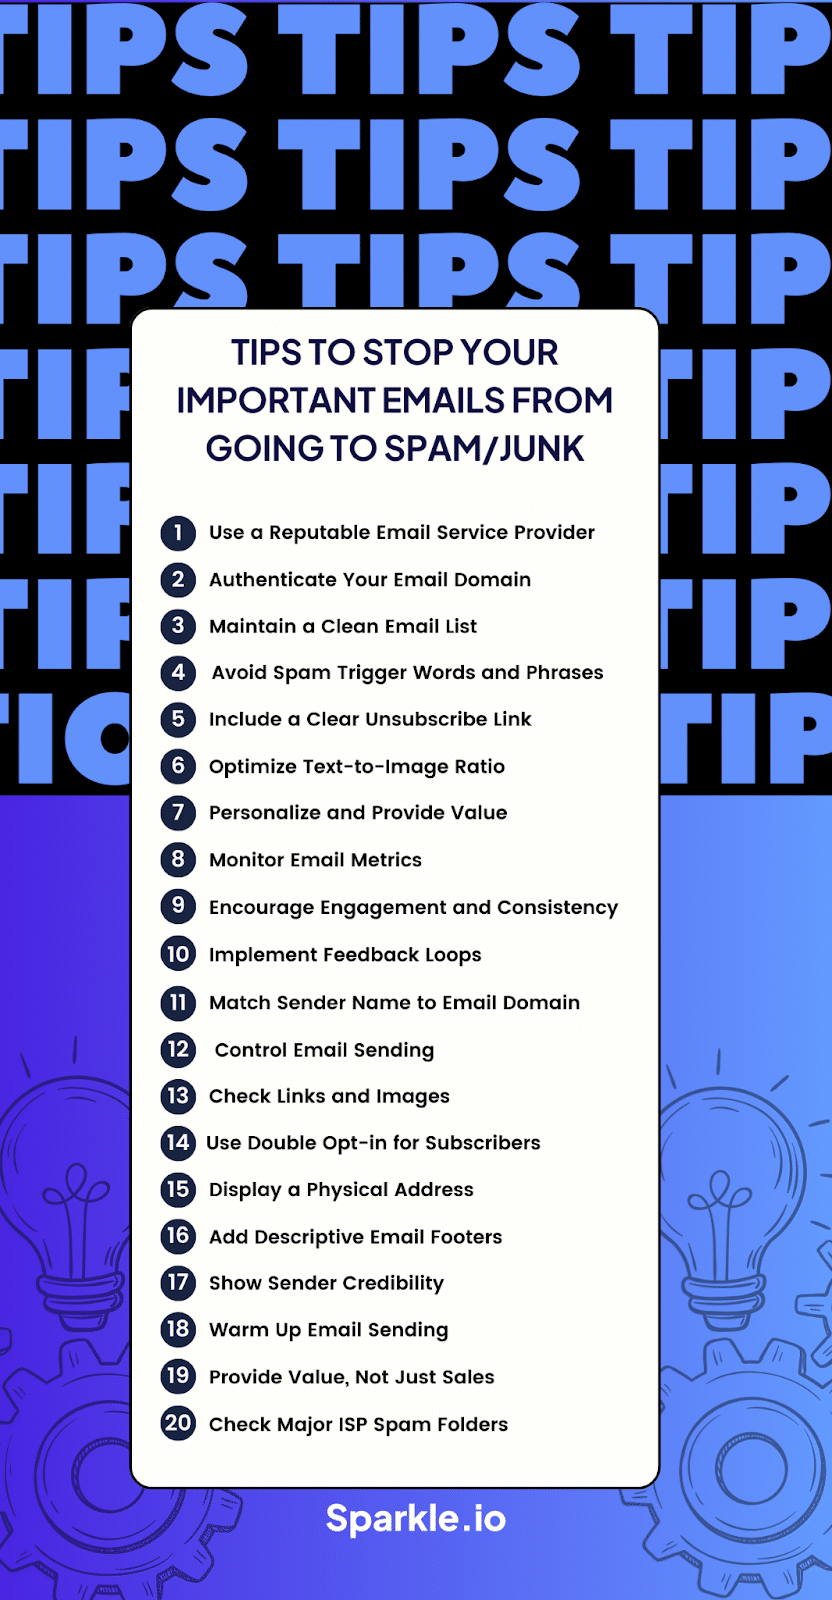 20 Tips to Stop Your Important Emails From Going to Spam/Junk Email